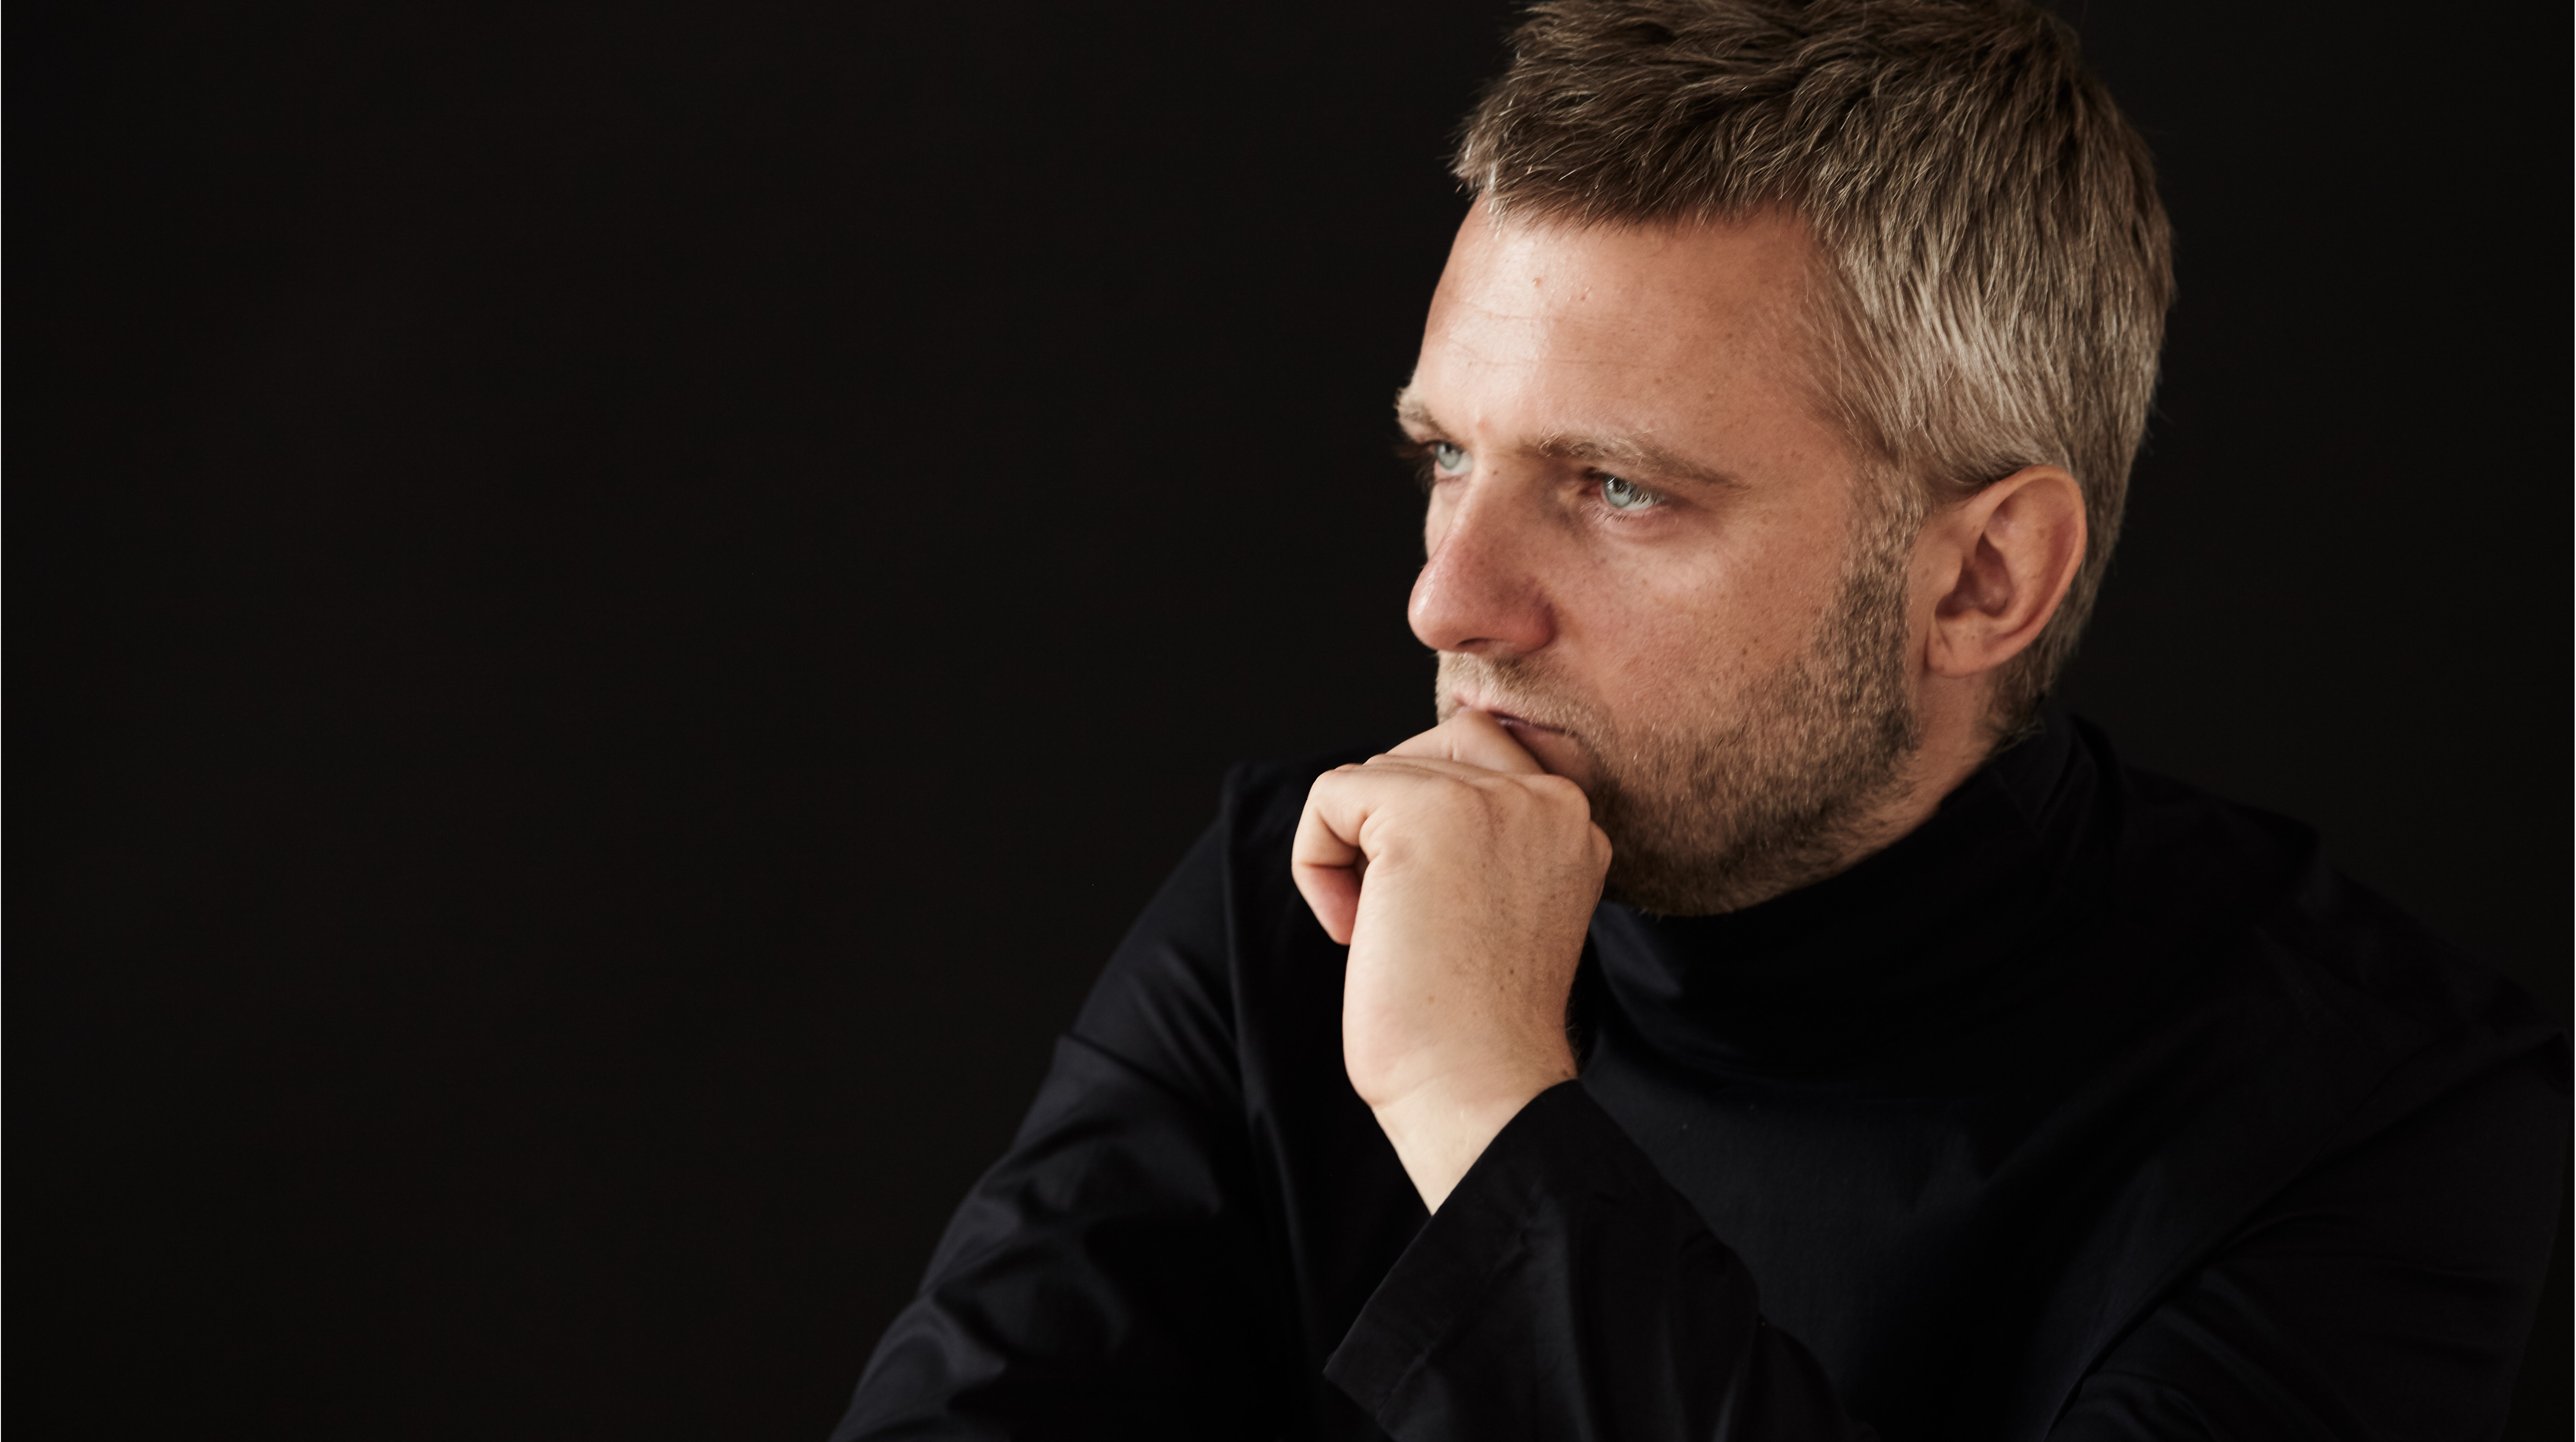 Ukrainian conductor Kyrylo Karabyts received an order from the King of Britain